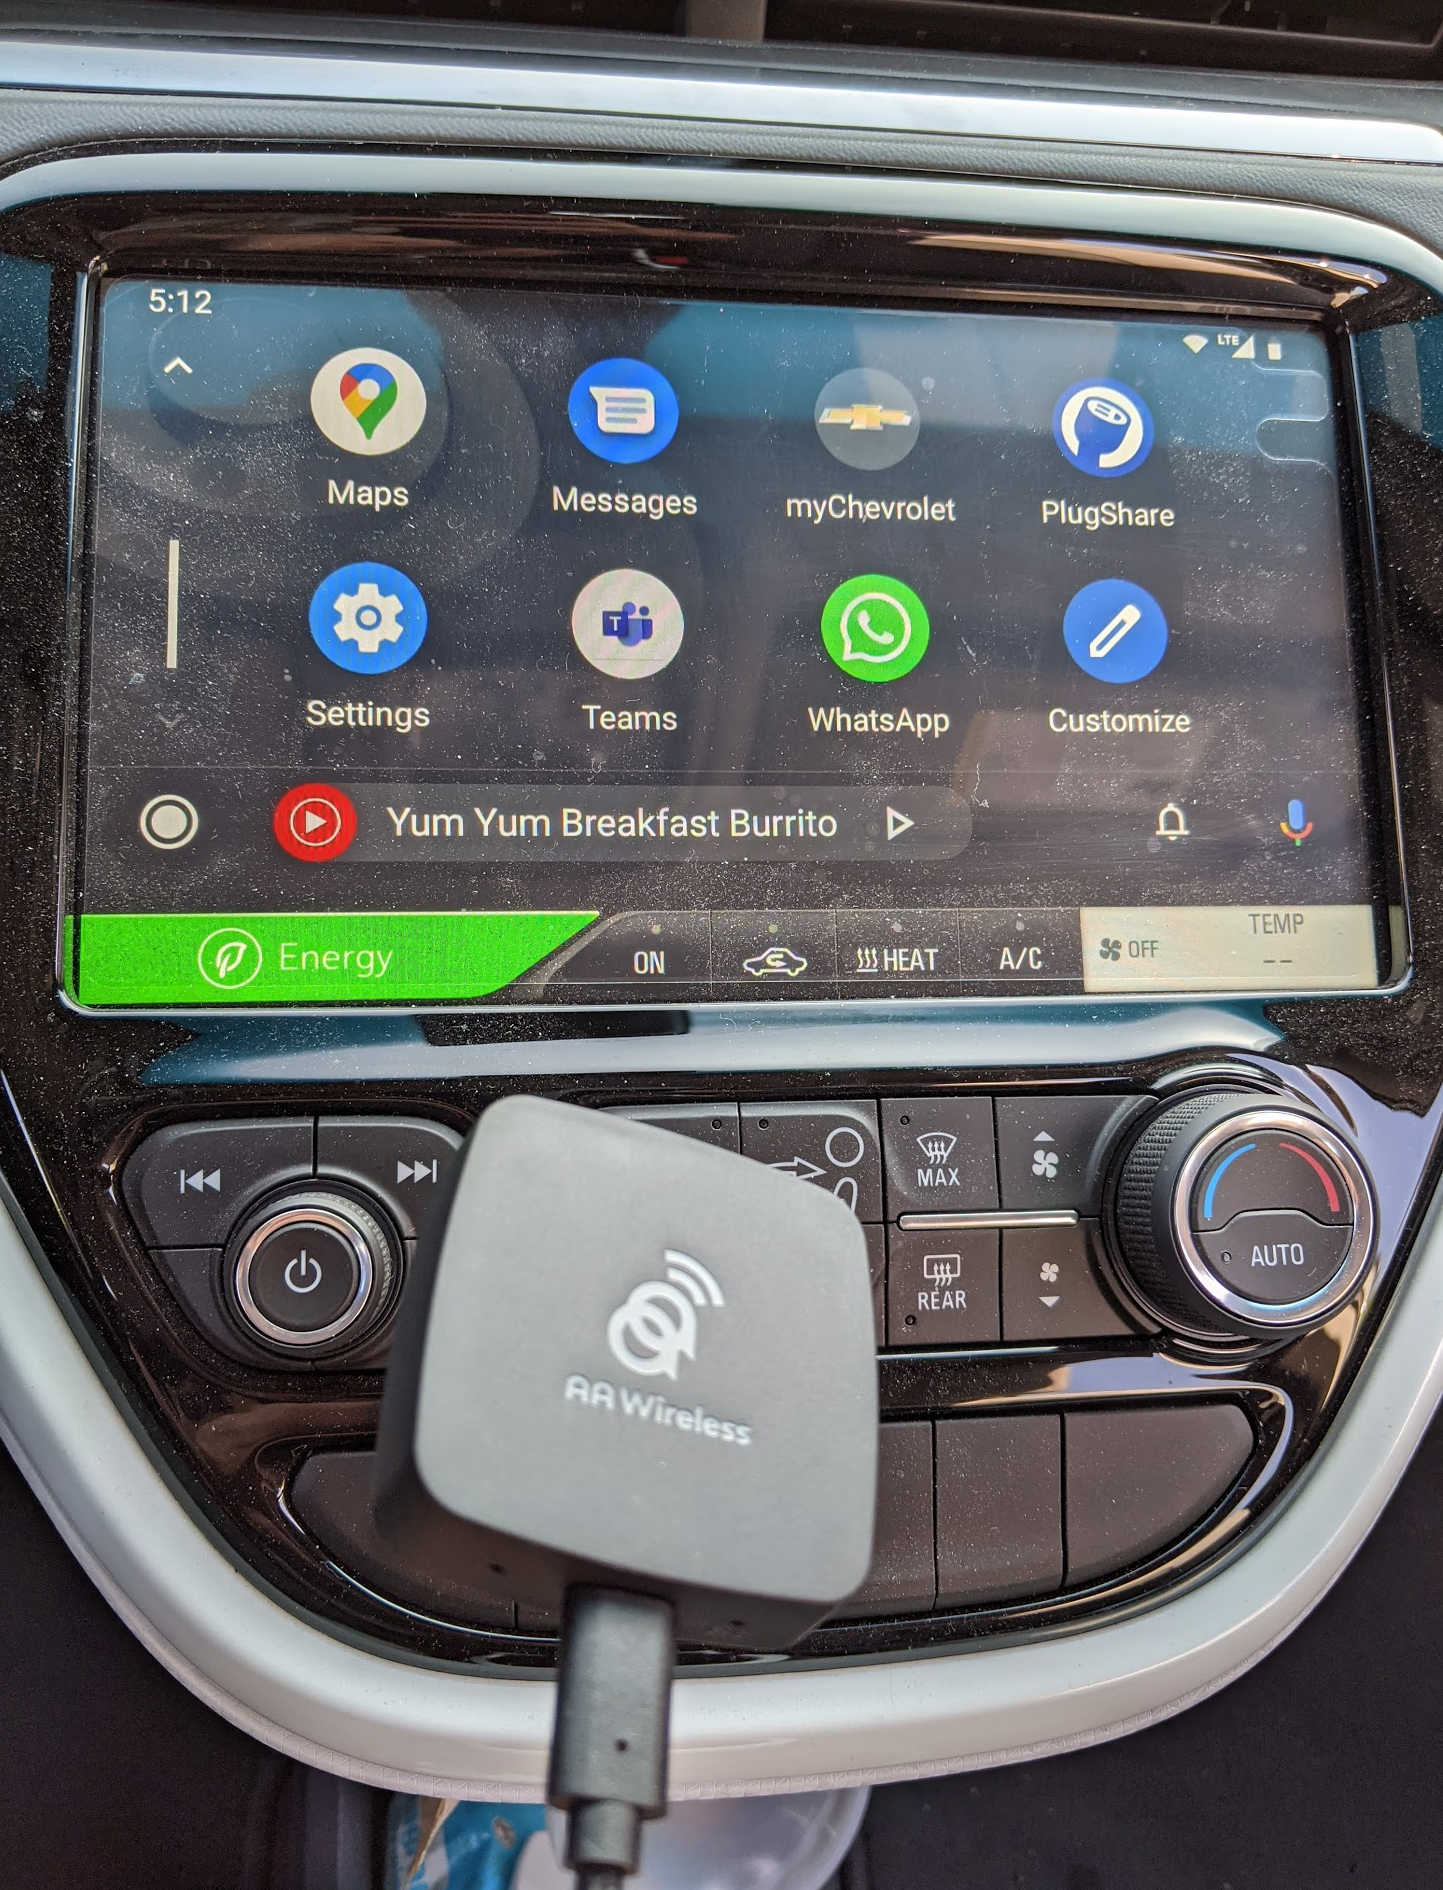 Review: AAWireless gives you wireless Android Auto in your car